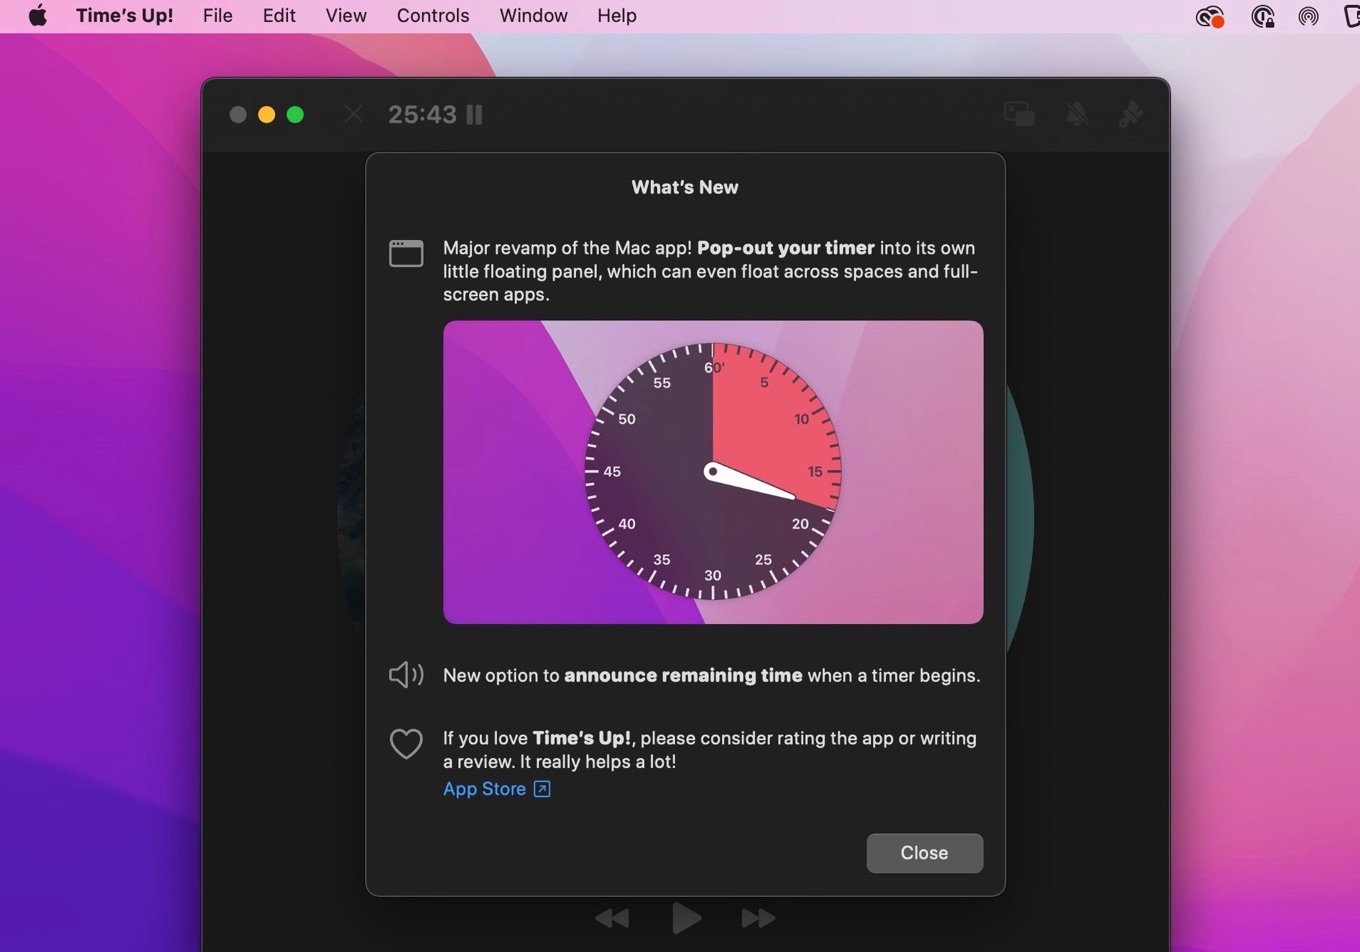 Time’s Up! for Mac v1.5